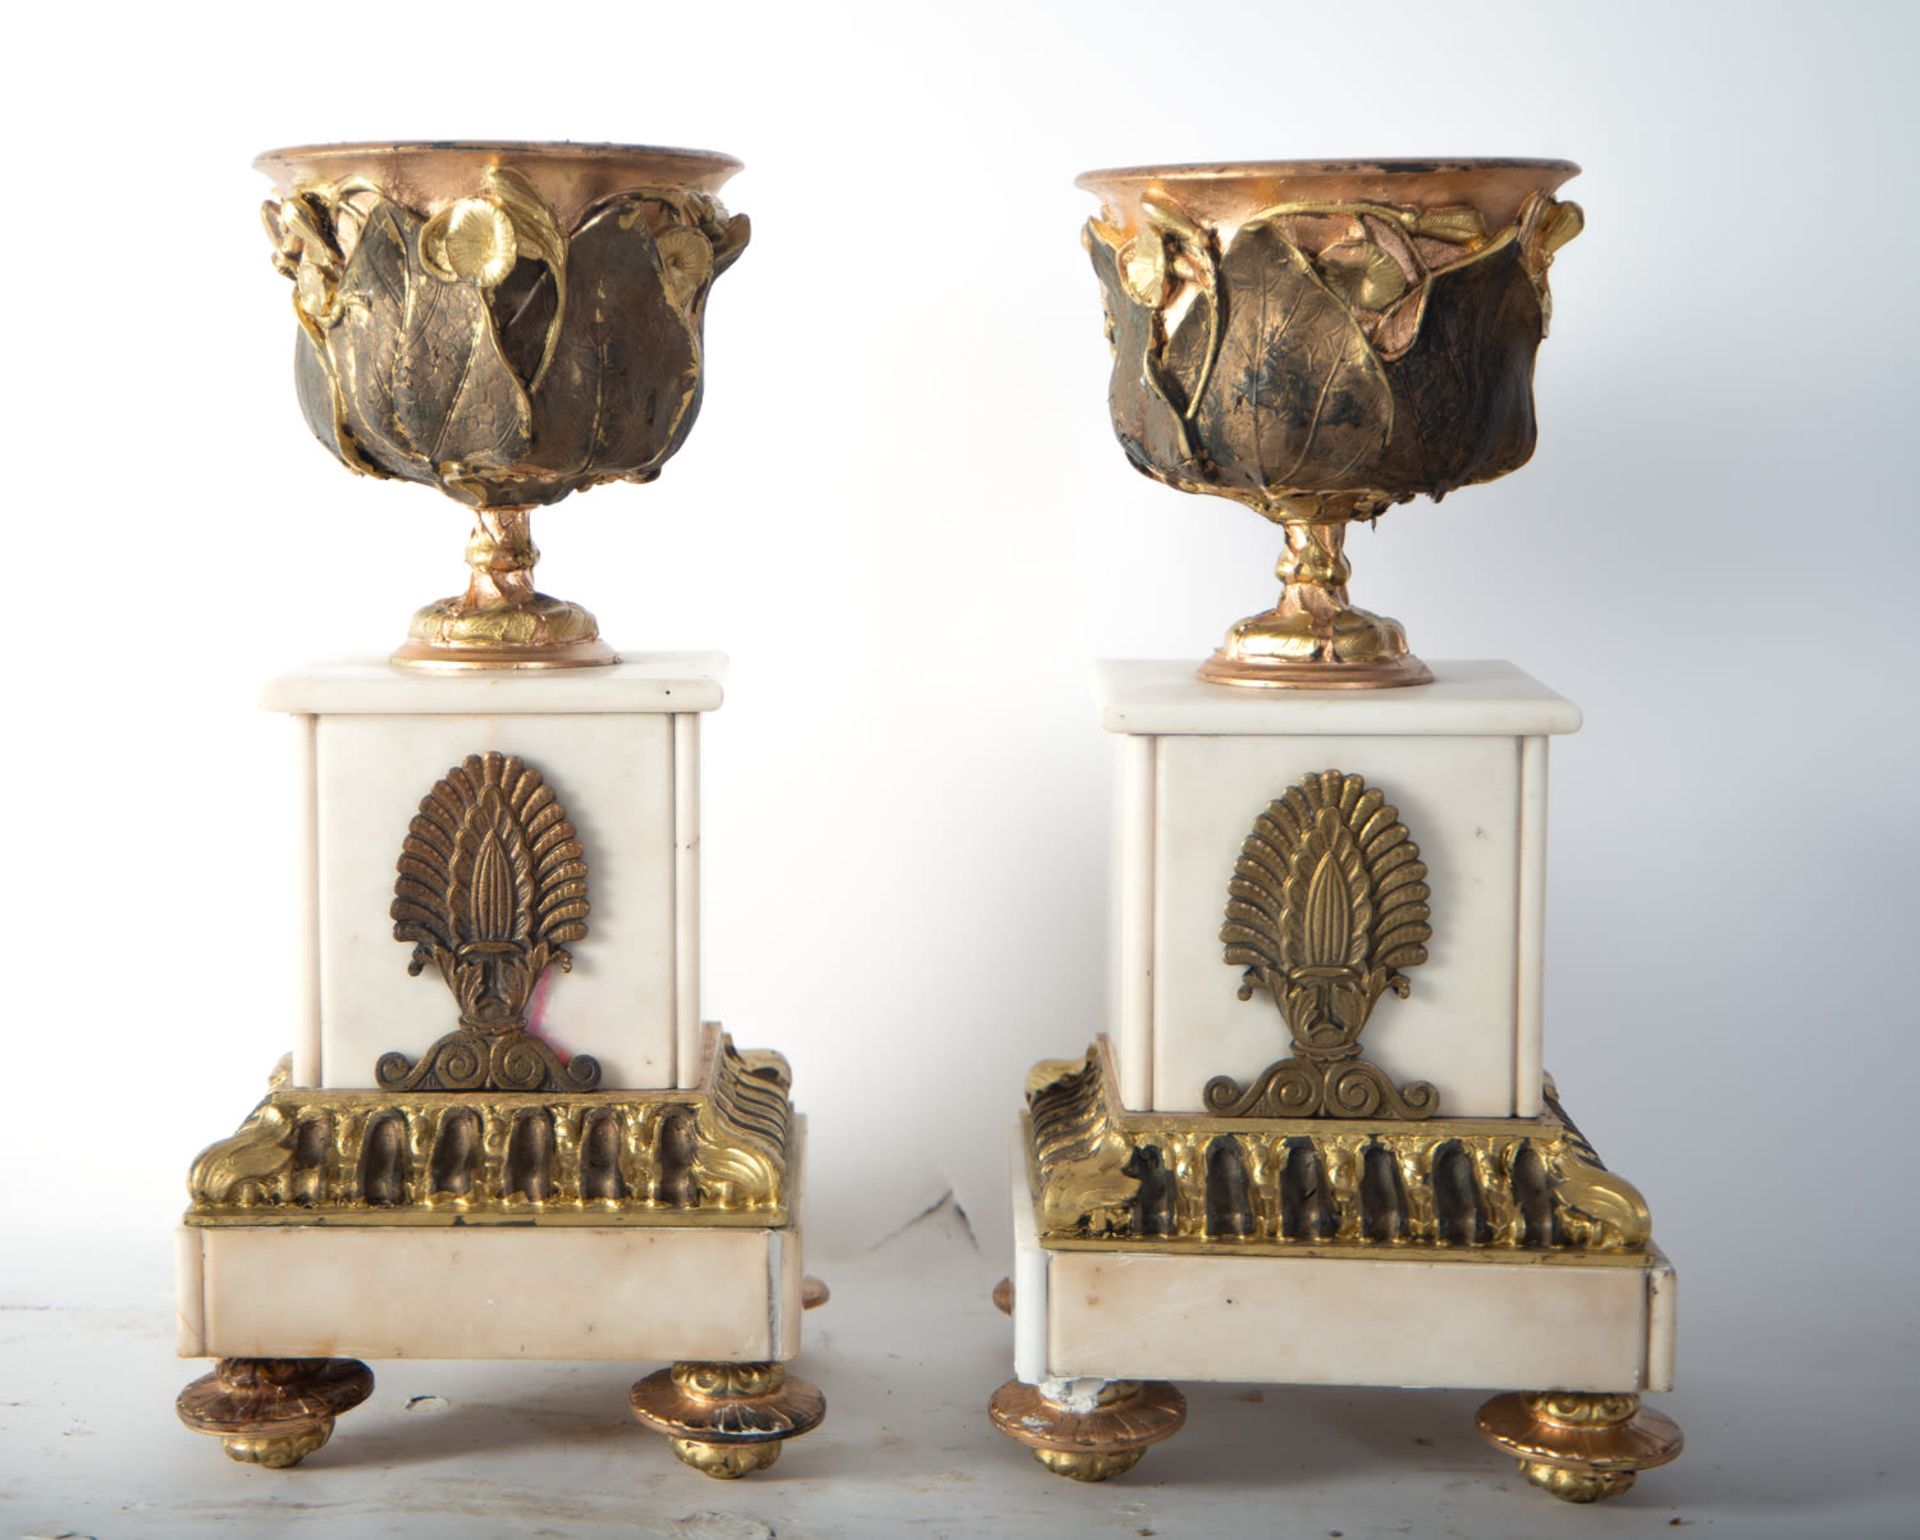 Bronze and white marble garniture with two cassolettes, "Allegory of Motherhood", 19th century - Image 5 of 9